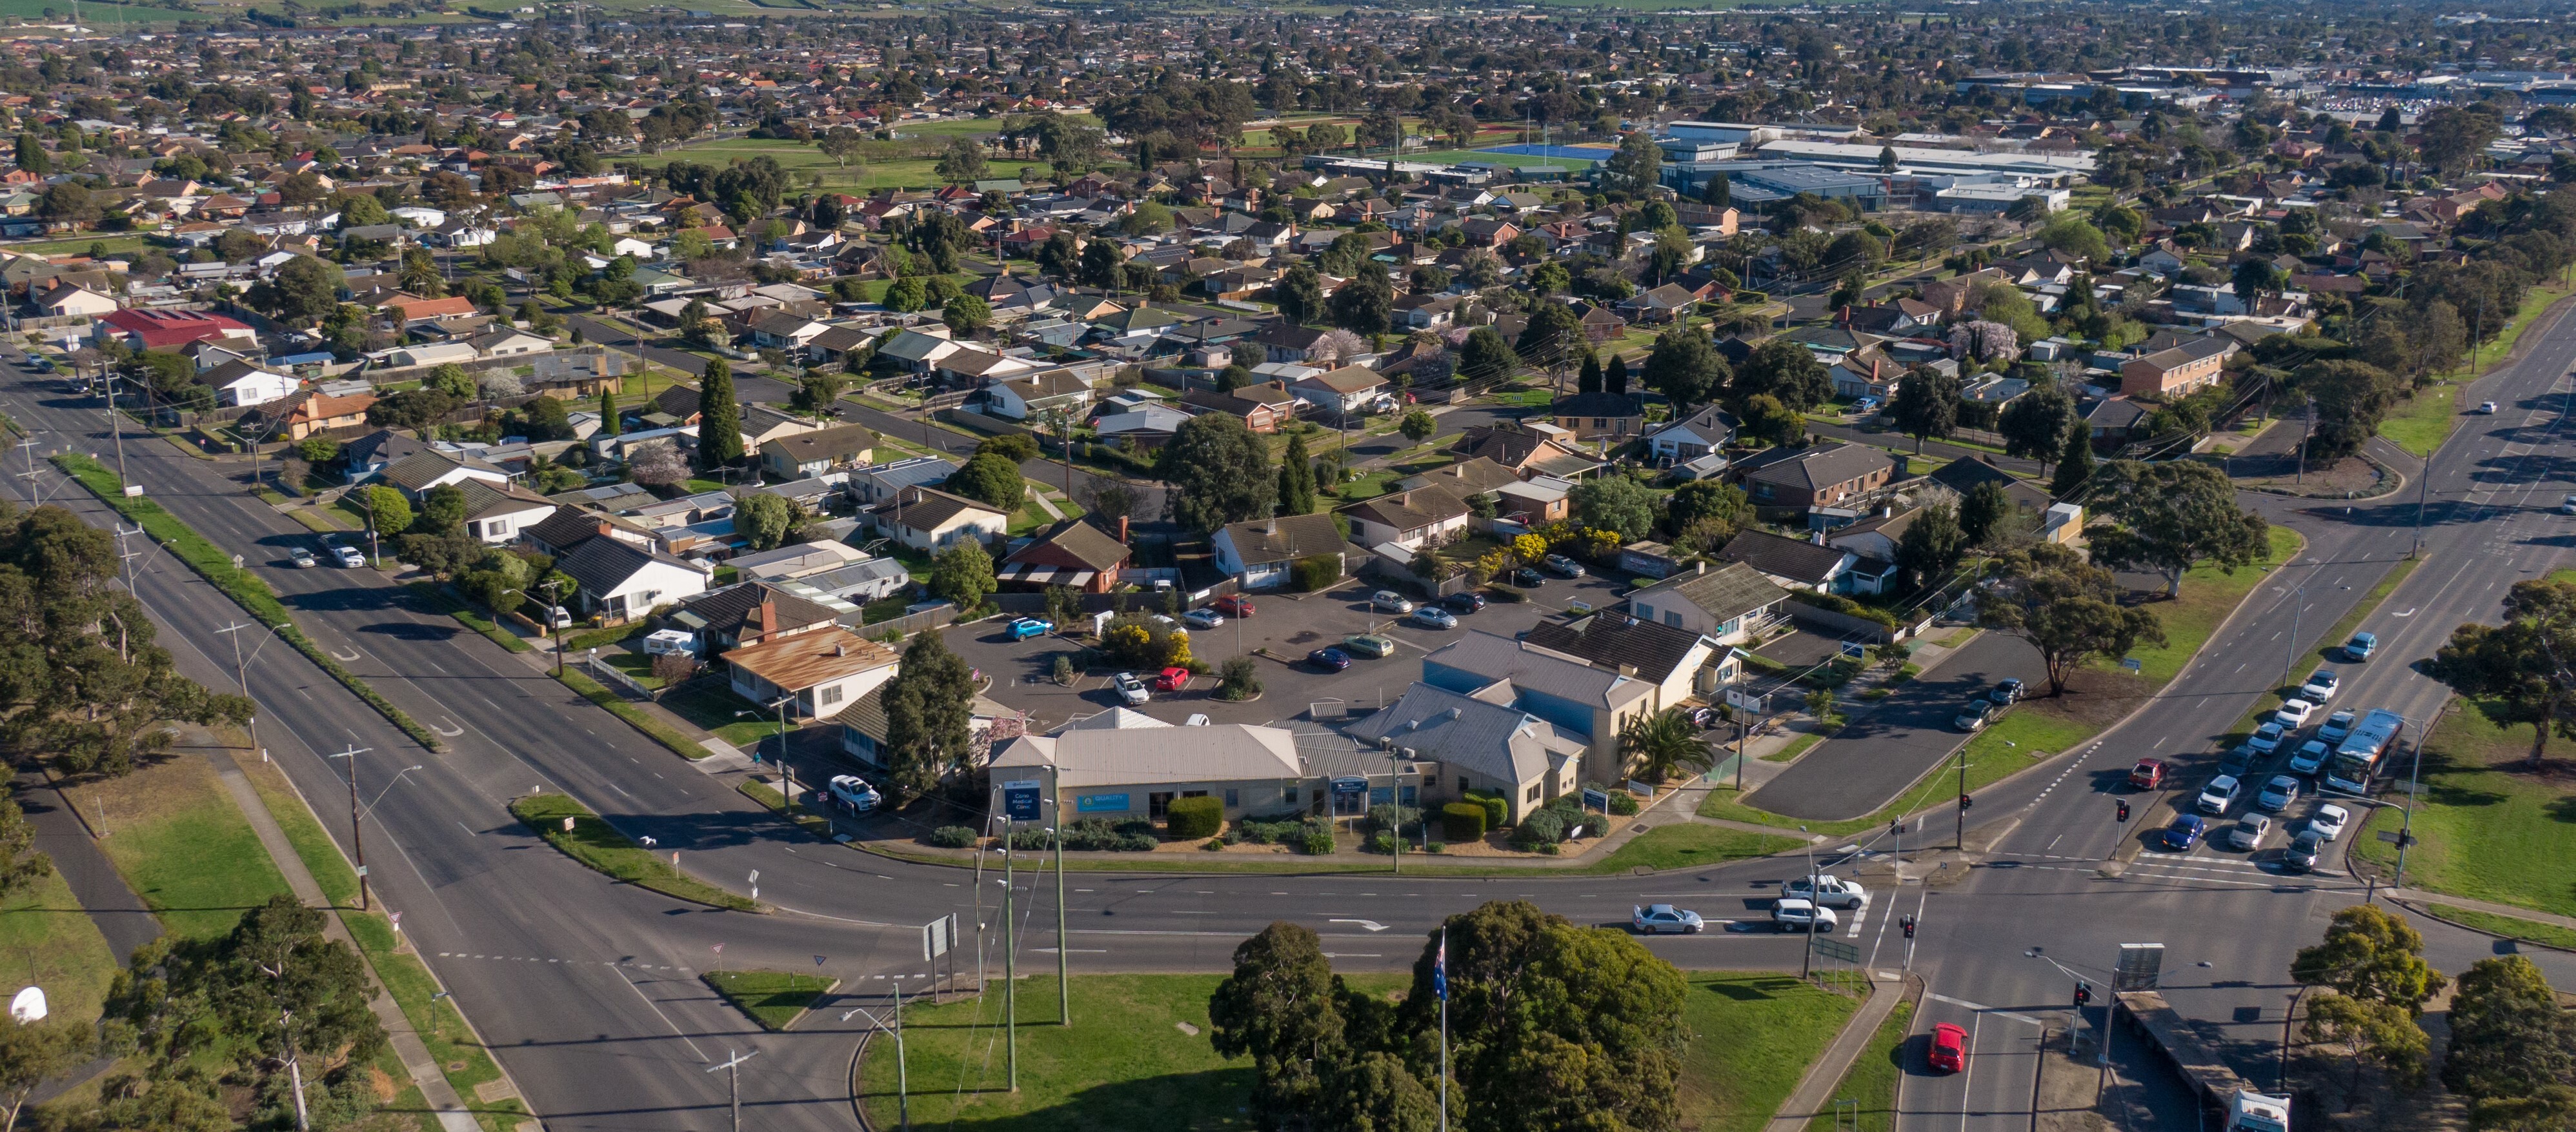 Prime Corner Medical Investment up for sale in the City of Greater Geelong